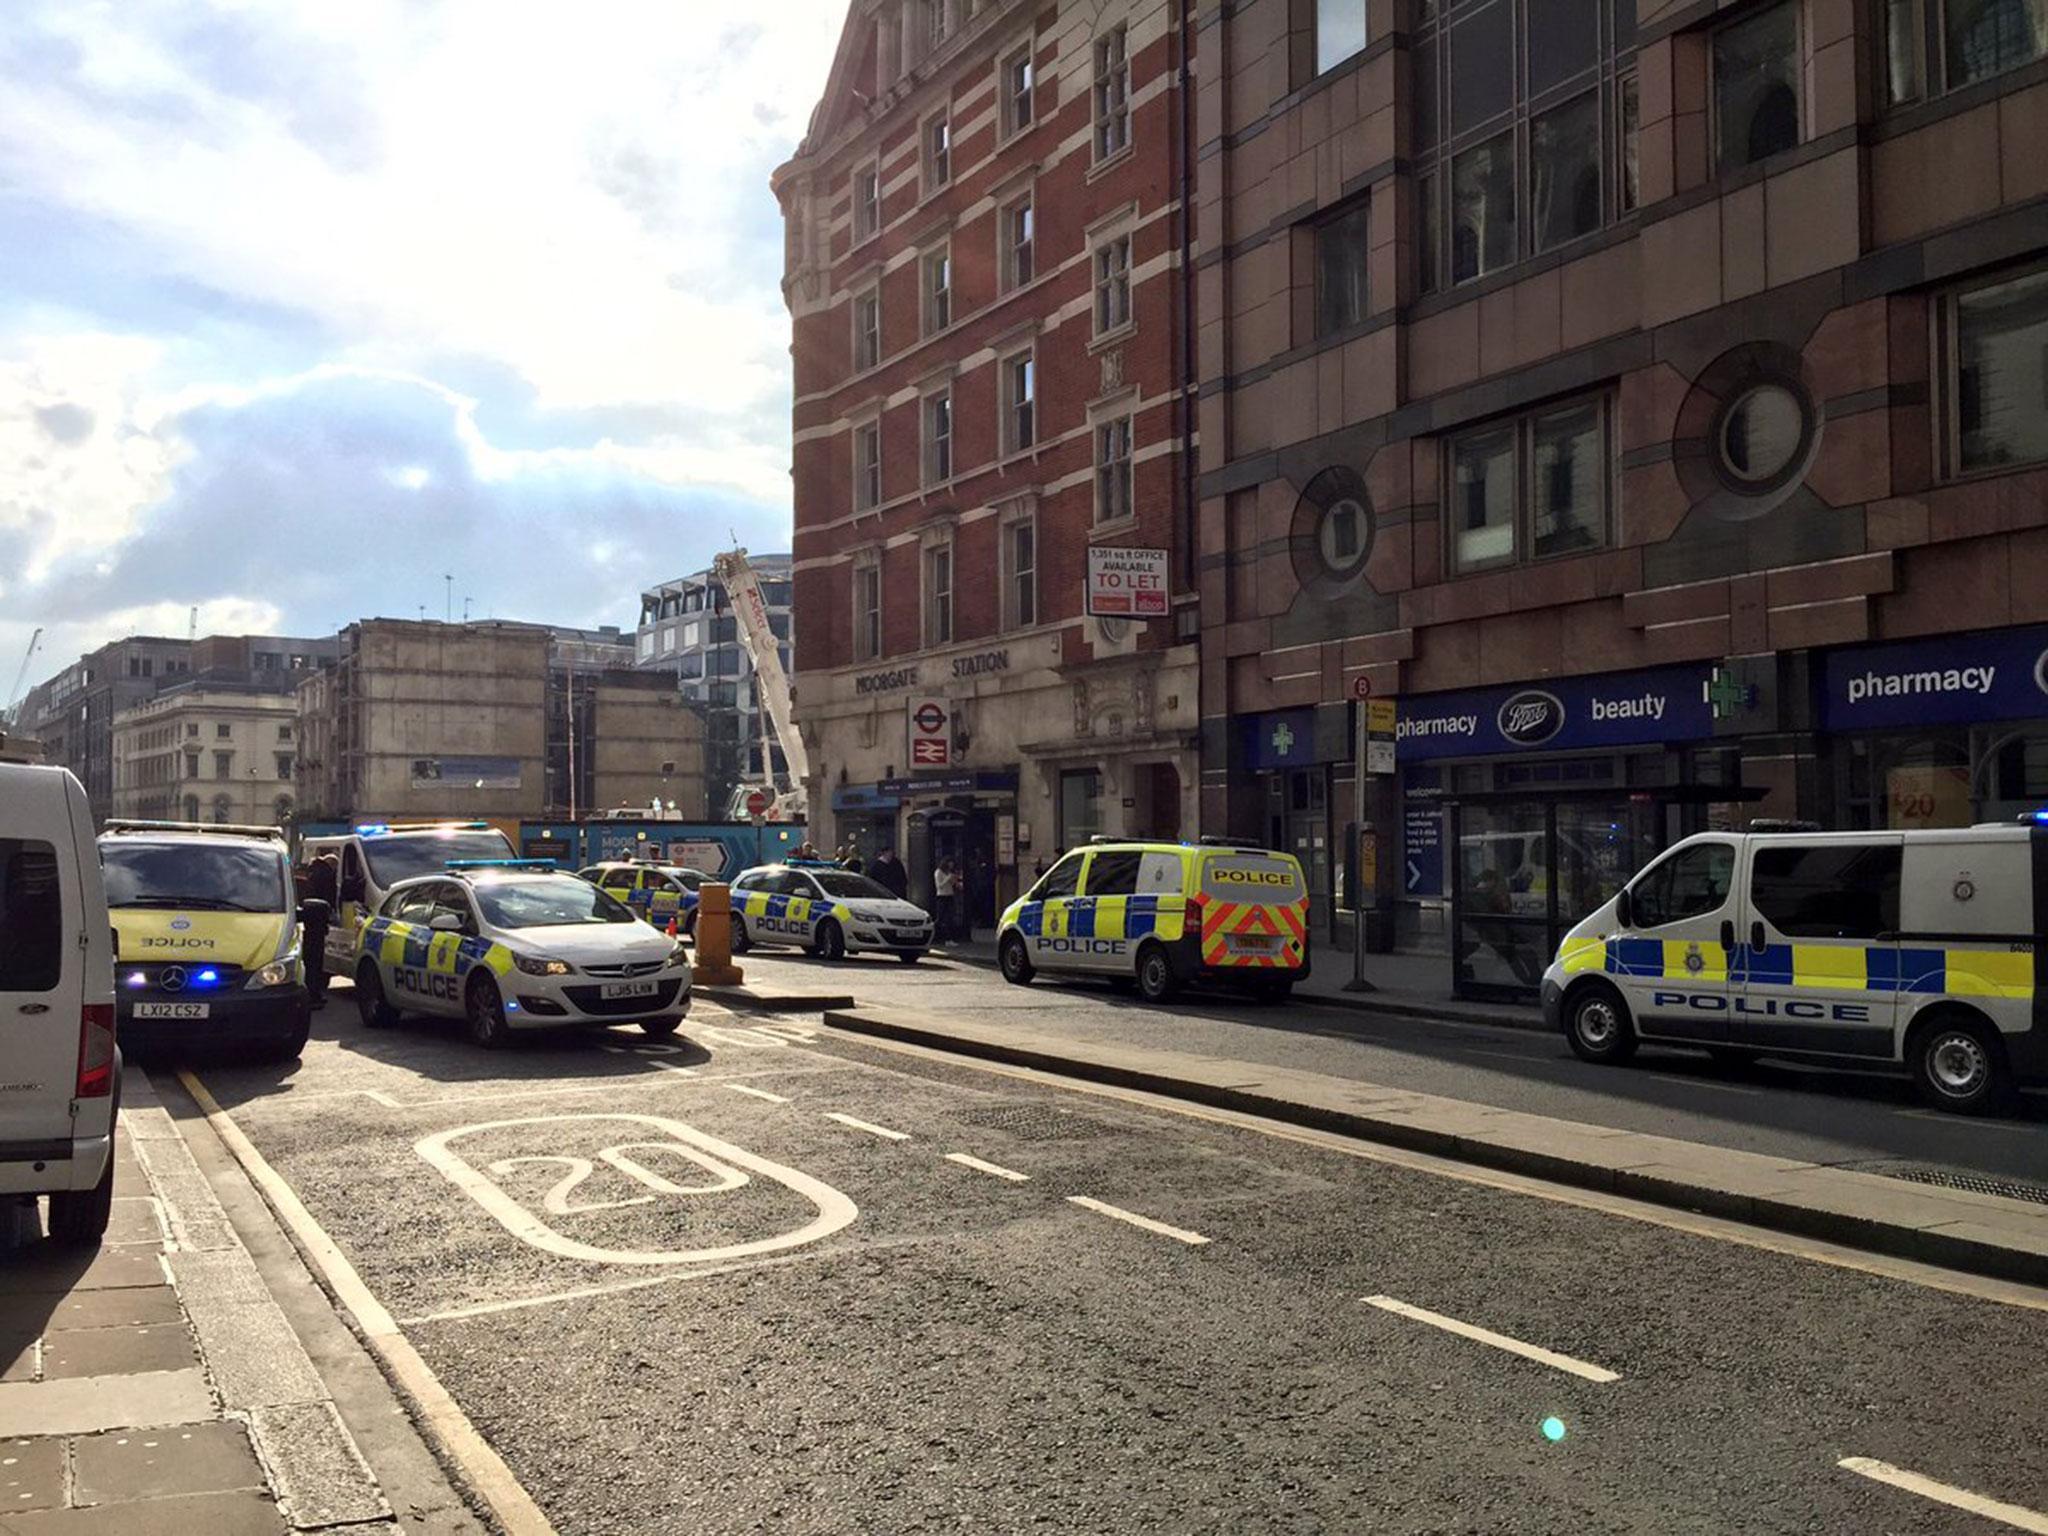 Police cars surround Moorgate station after it was evacuated